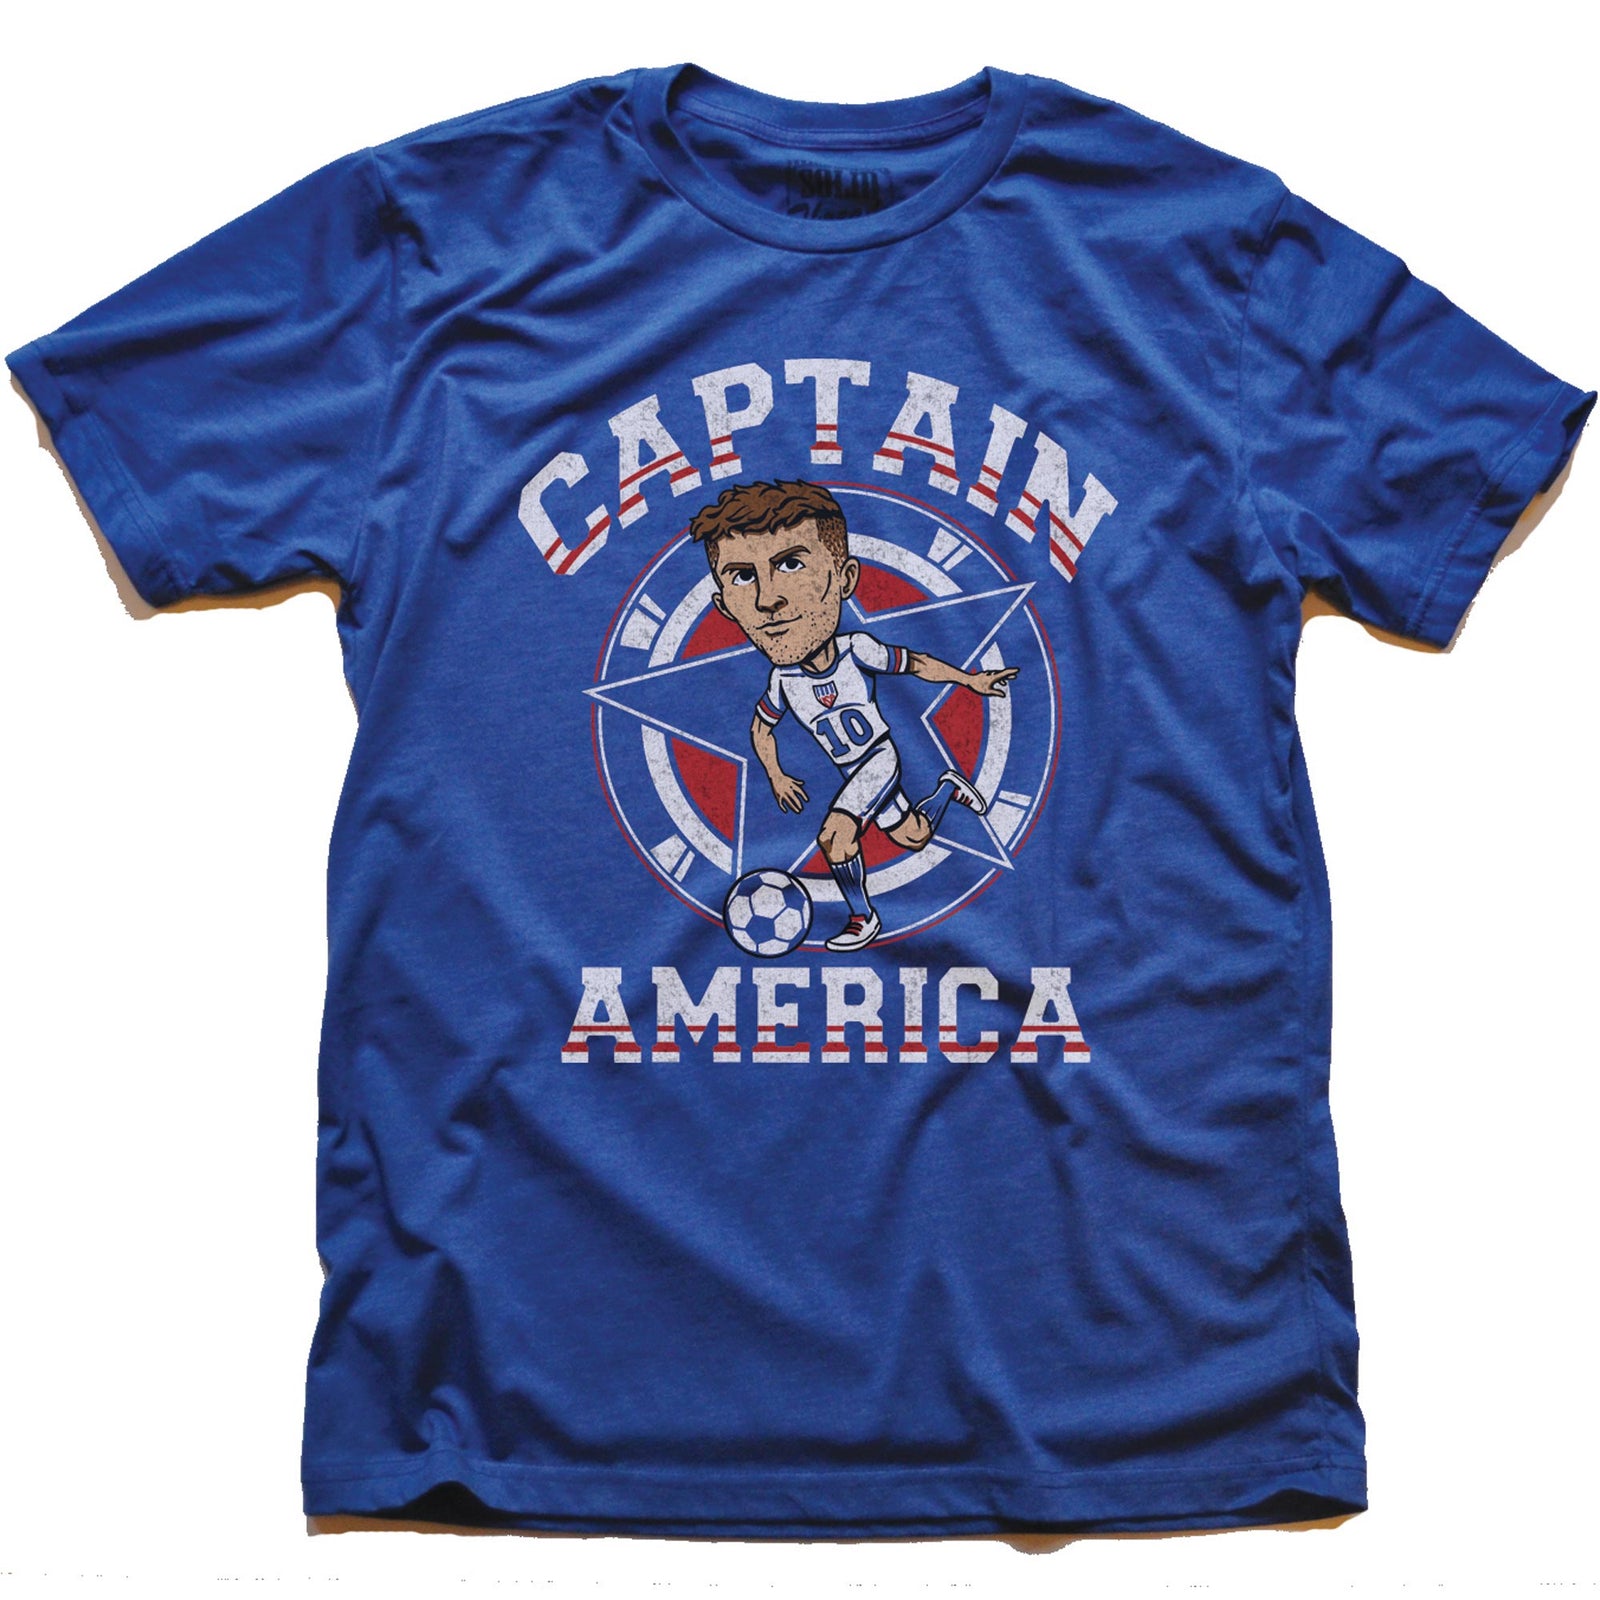 Men's Captain America Soccer Retro Graphic T-Shirt | Cool Christian Pulisic Soft Tee | Solid Threads